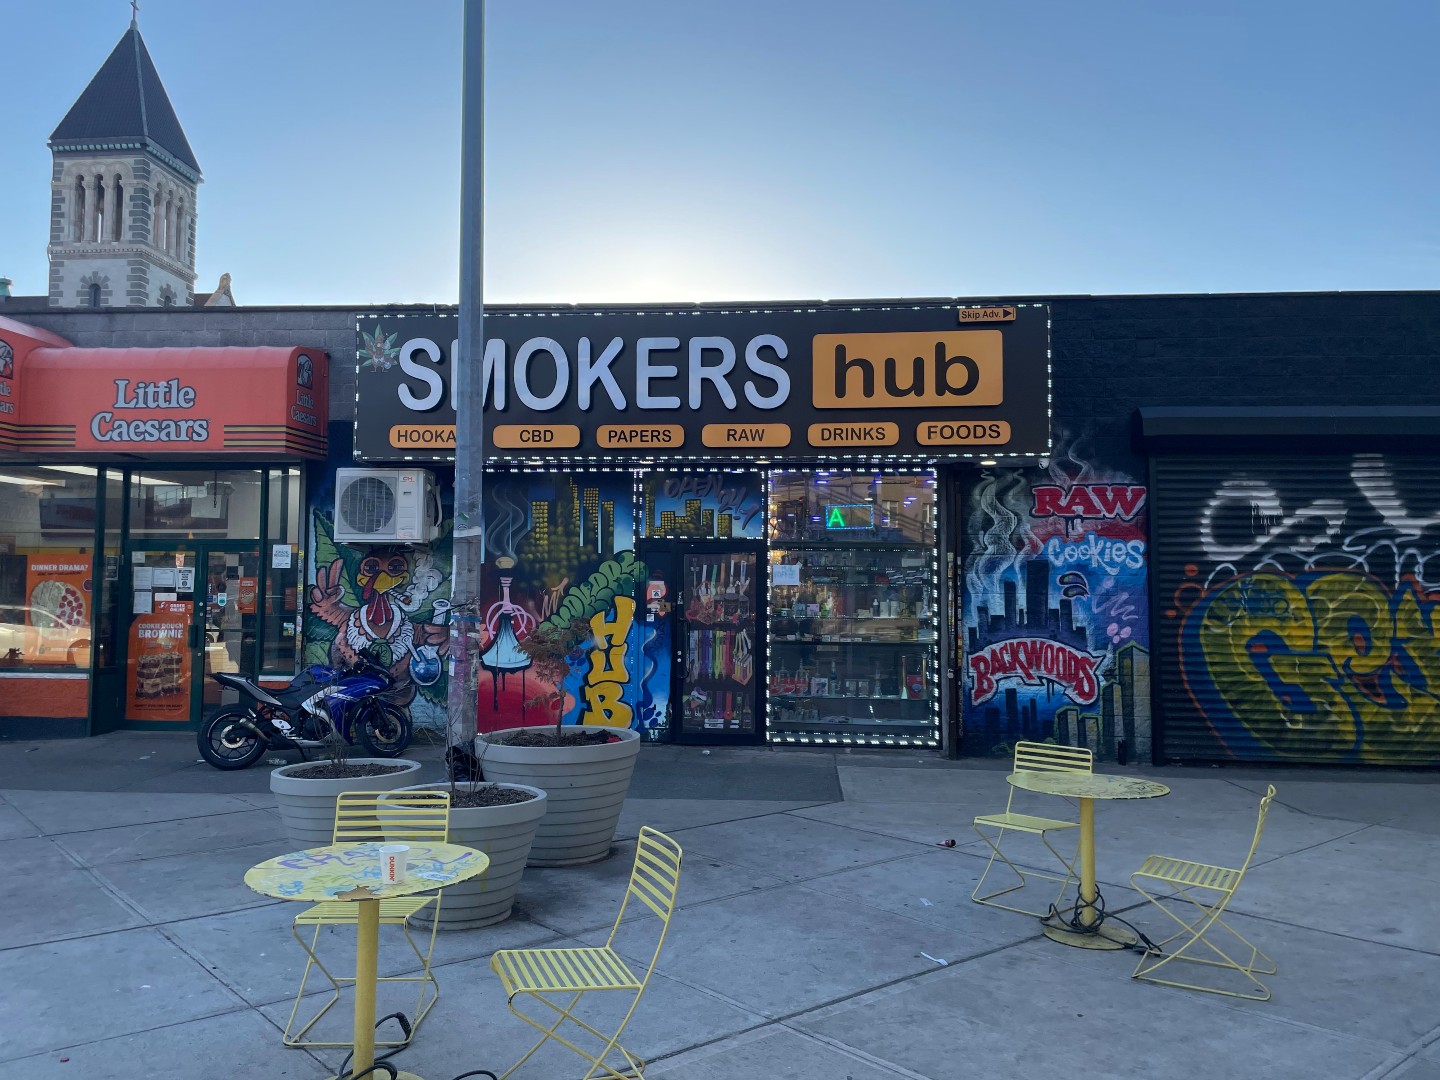 The storefront of an unlicensed cannabis vendor in Stuyvesant Heights, Brooklyn.